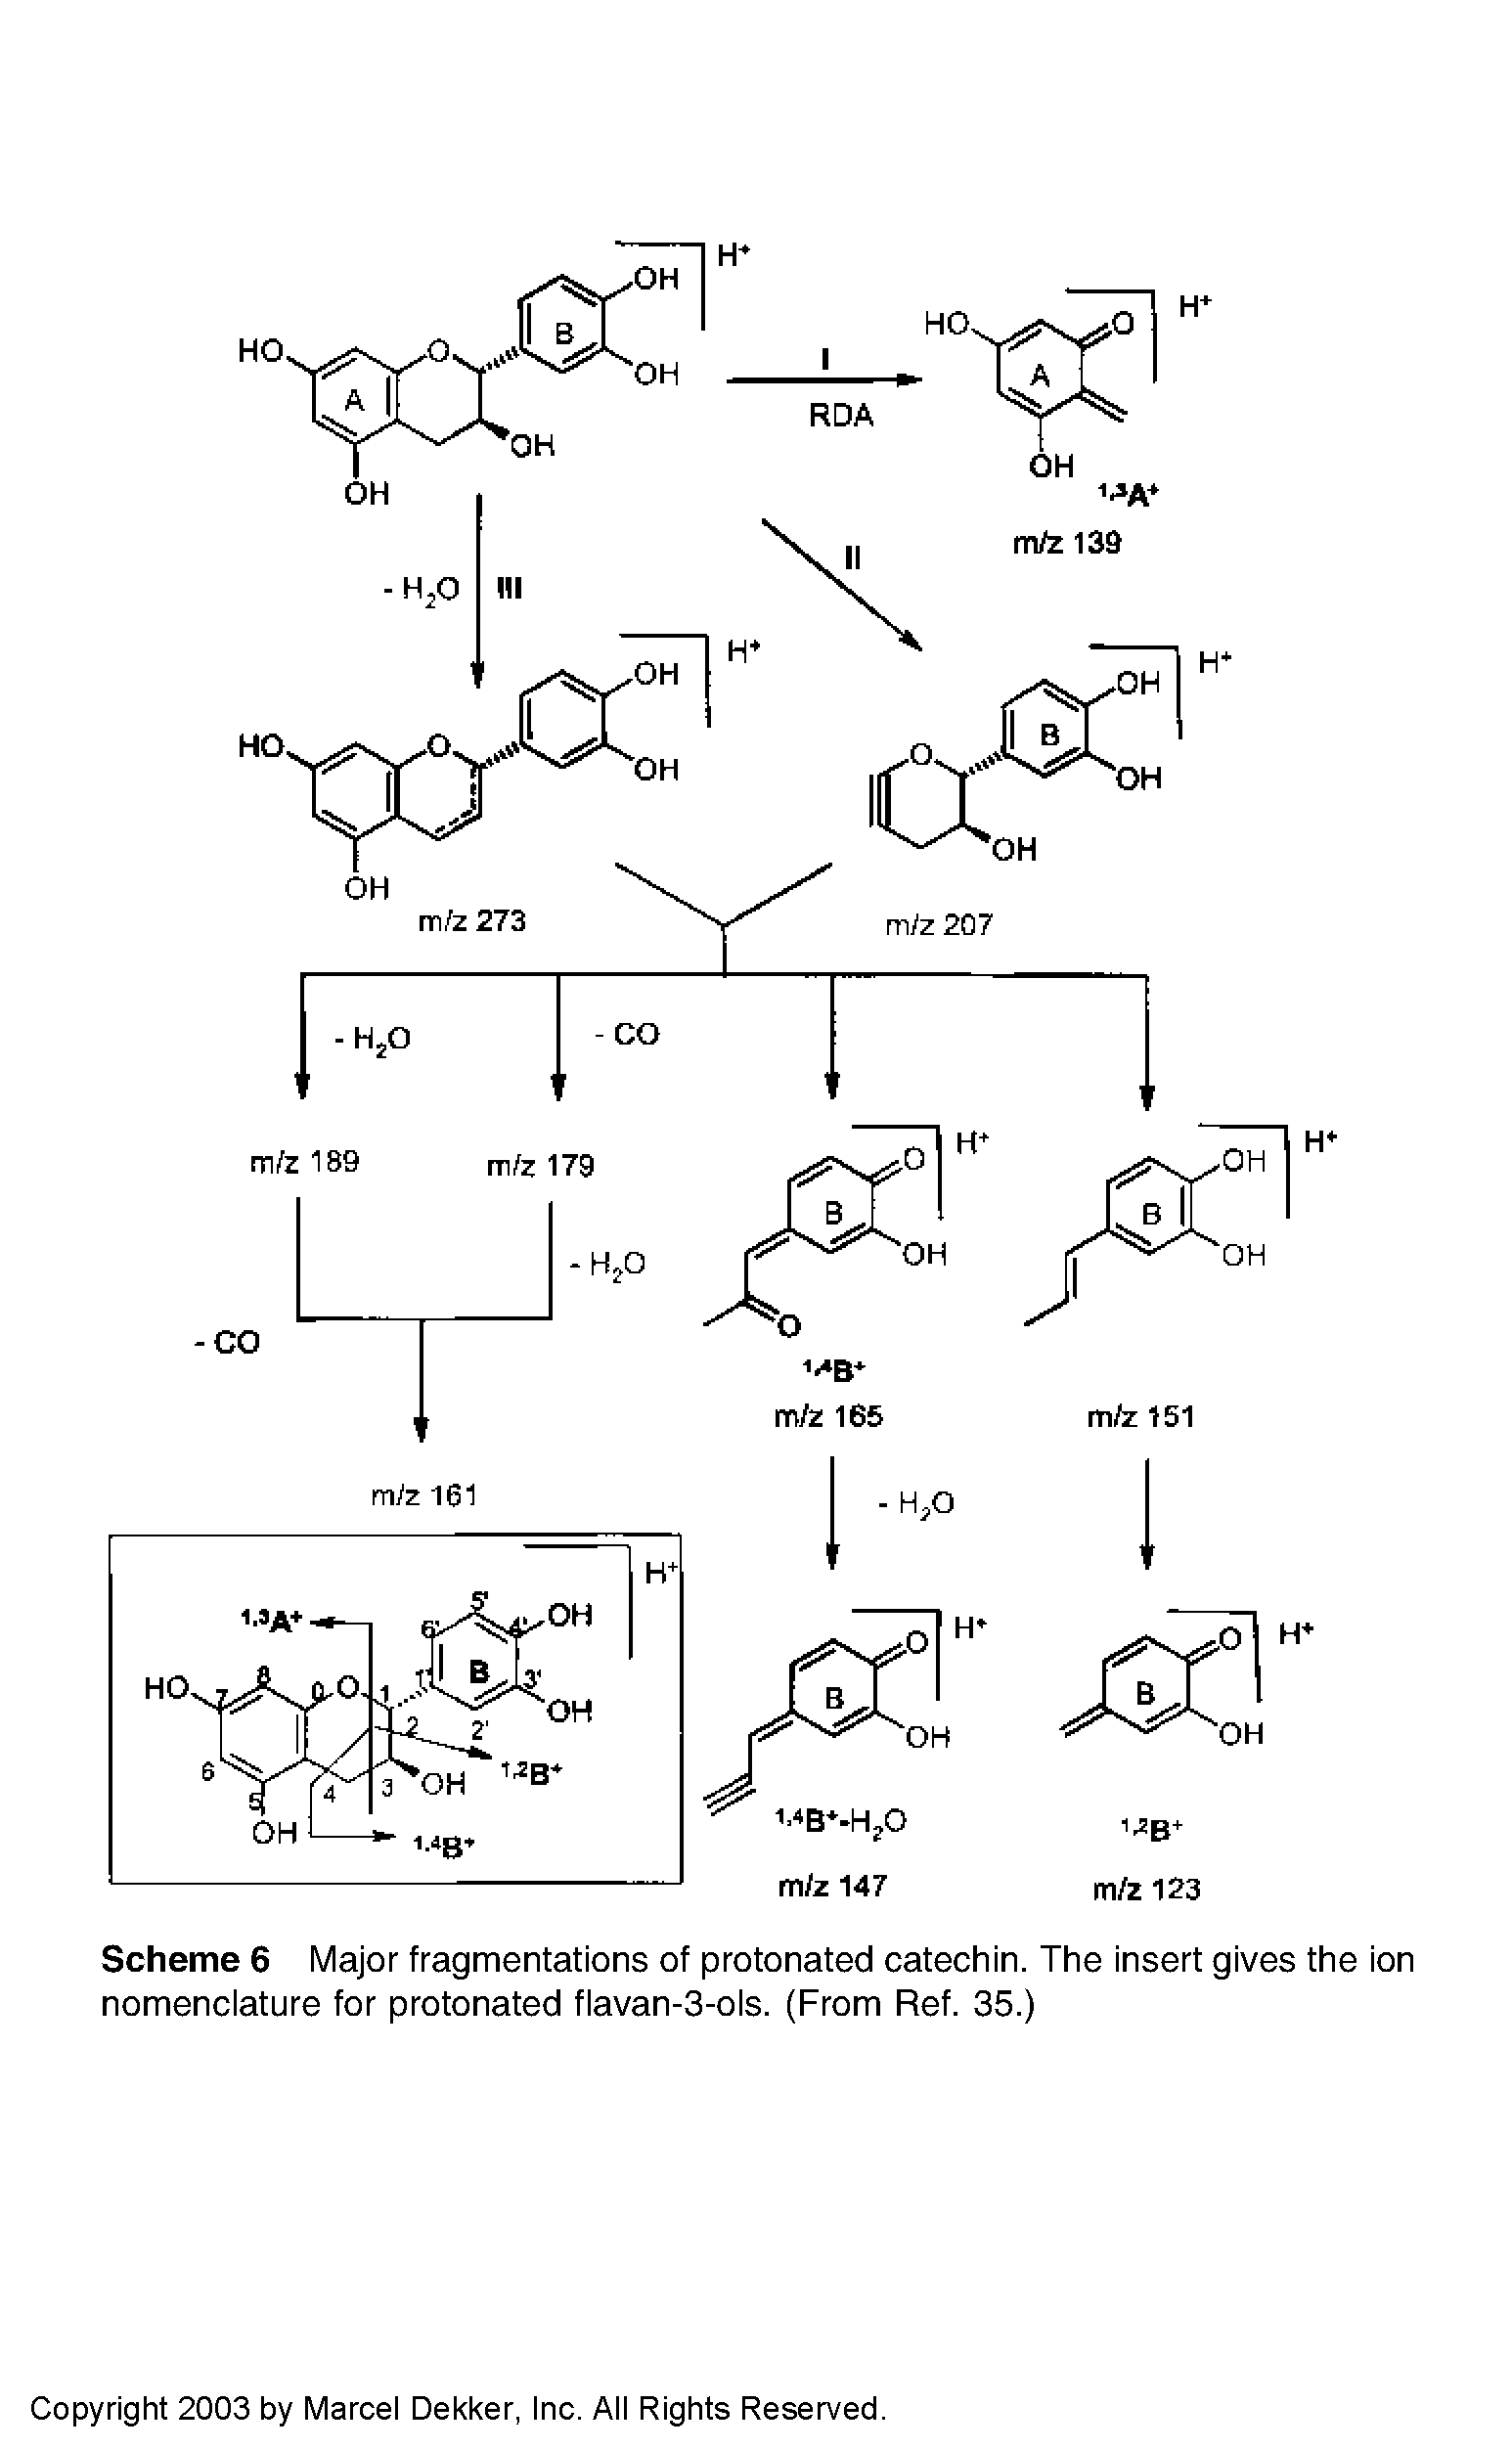 Scheme 6 Major fragmentations of protonated catechin. The insert gives the ion nomenciature for protonated fiavan-3-ois. (From Ref. 35.)...